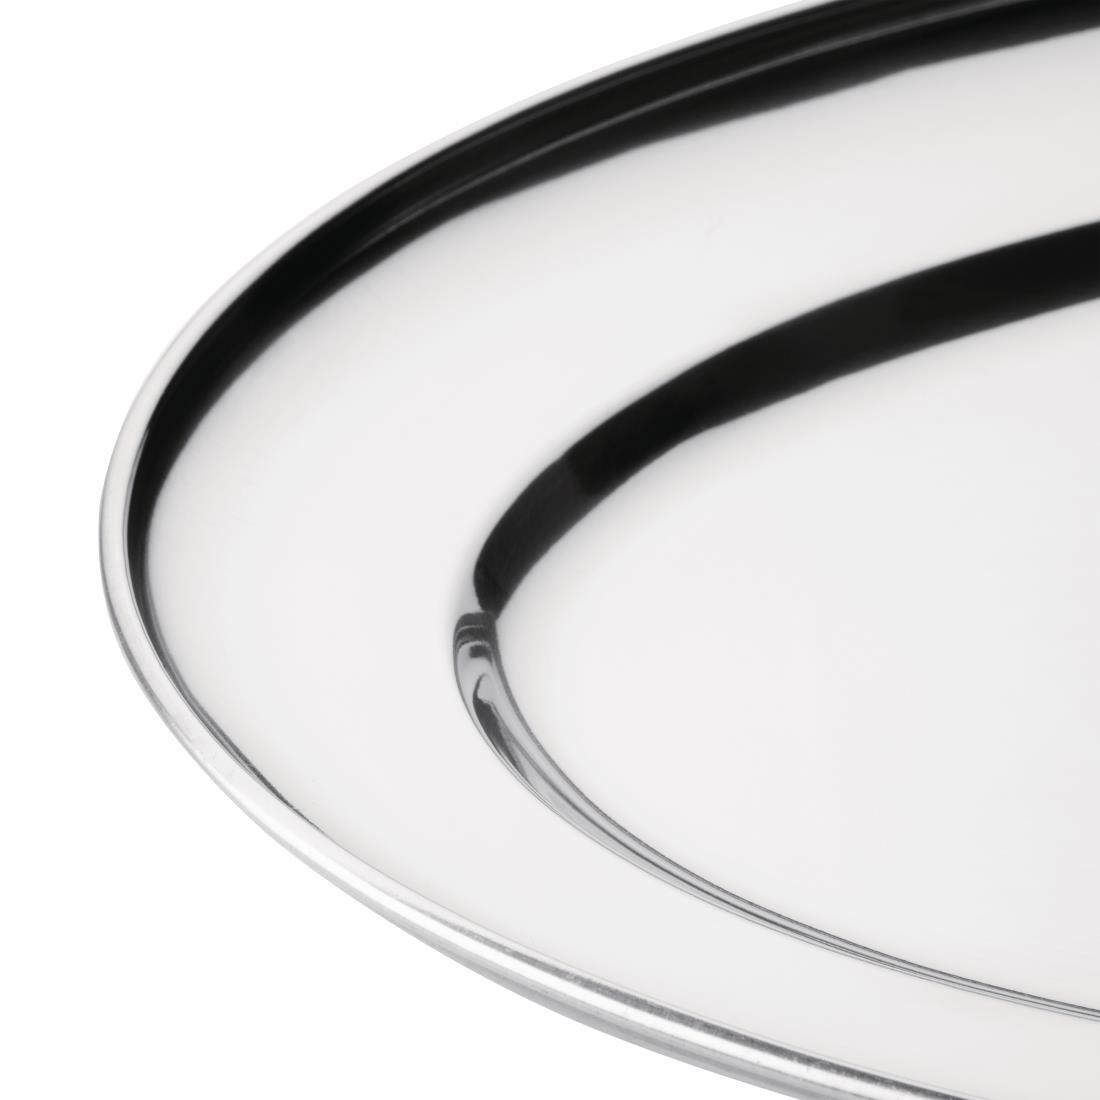 Olympia Stainless Steel Oval Serving Tray 300mm - K363  - 6